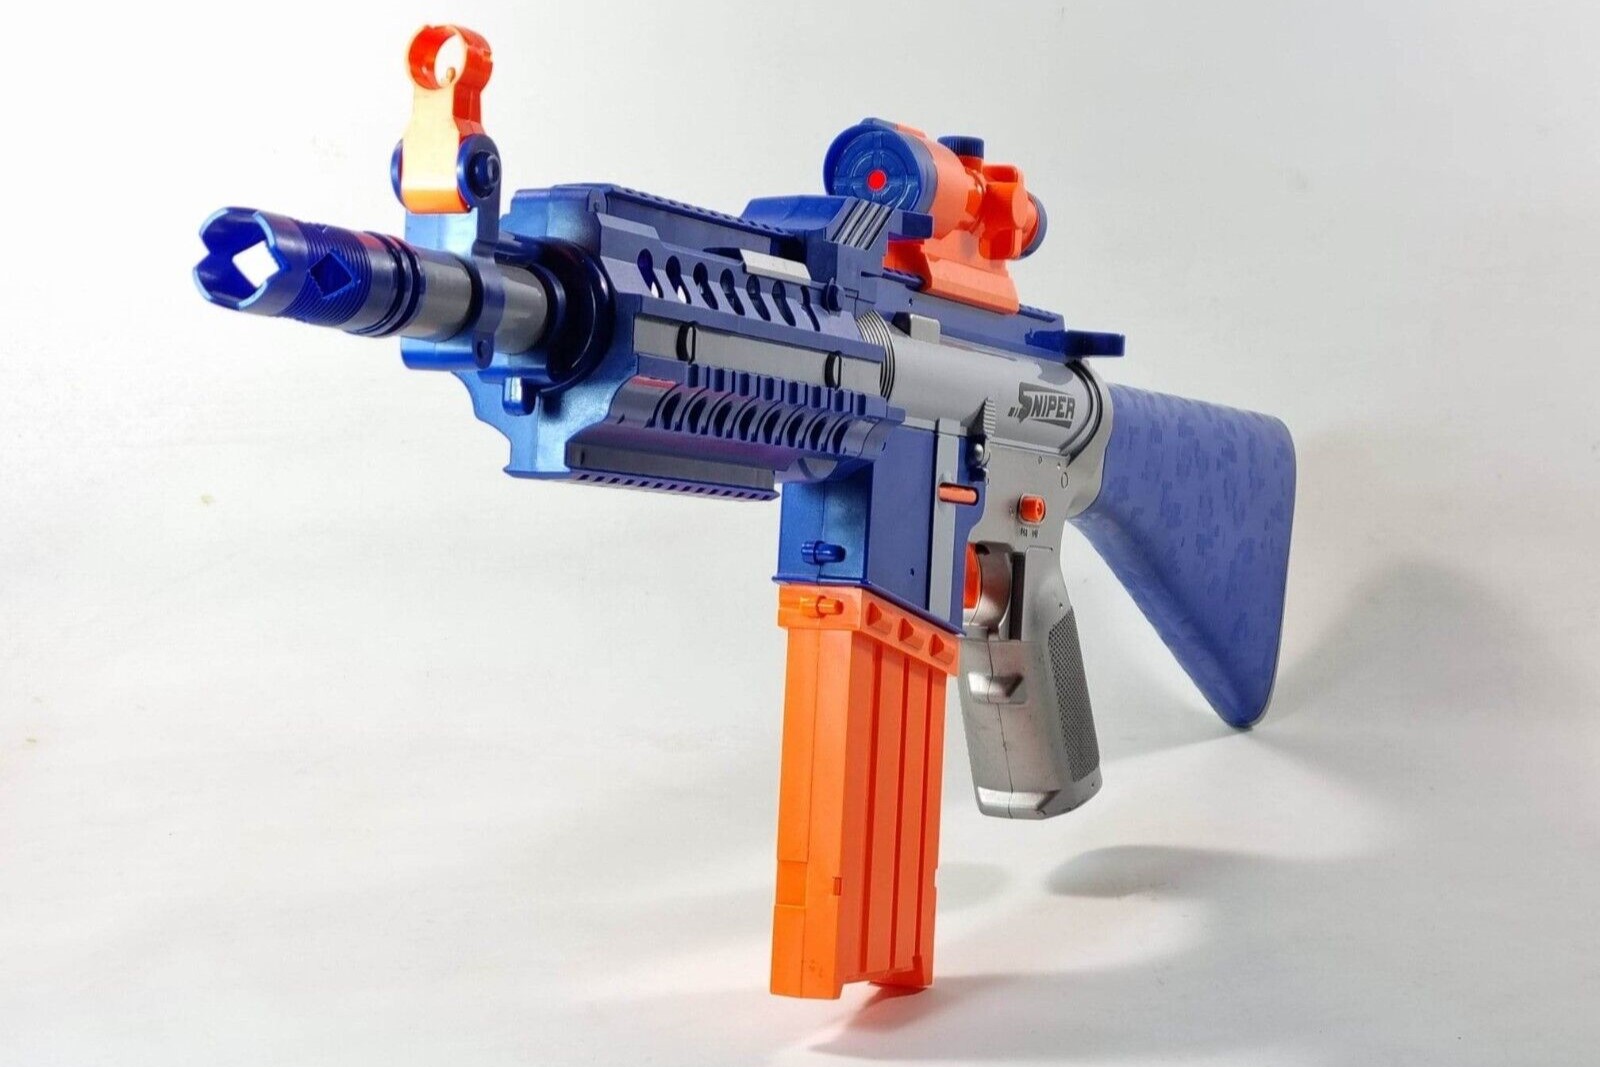 Top M4-style Nerf Guns For Close Quarters Combat - No Off-Brand, Only Worker Guns!